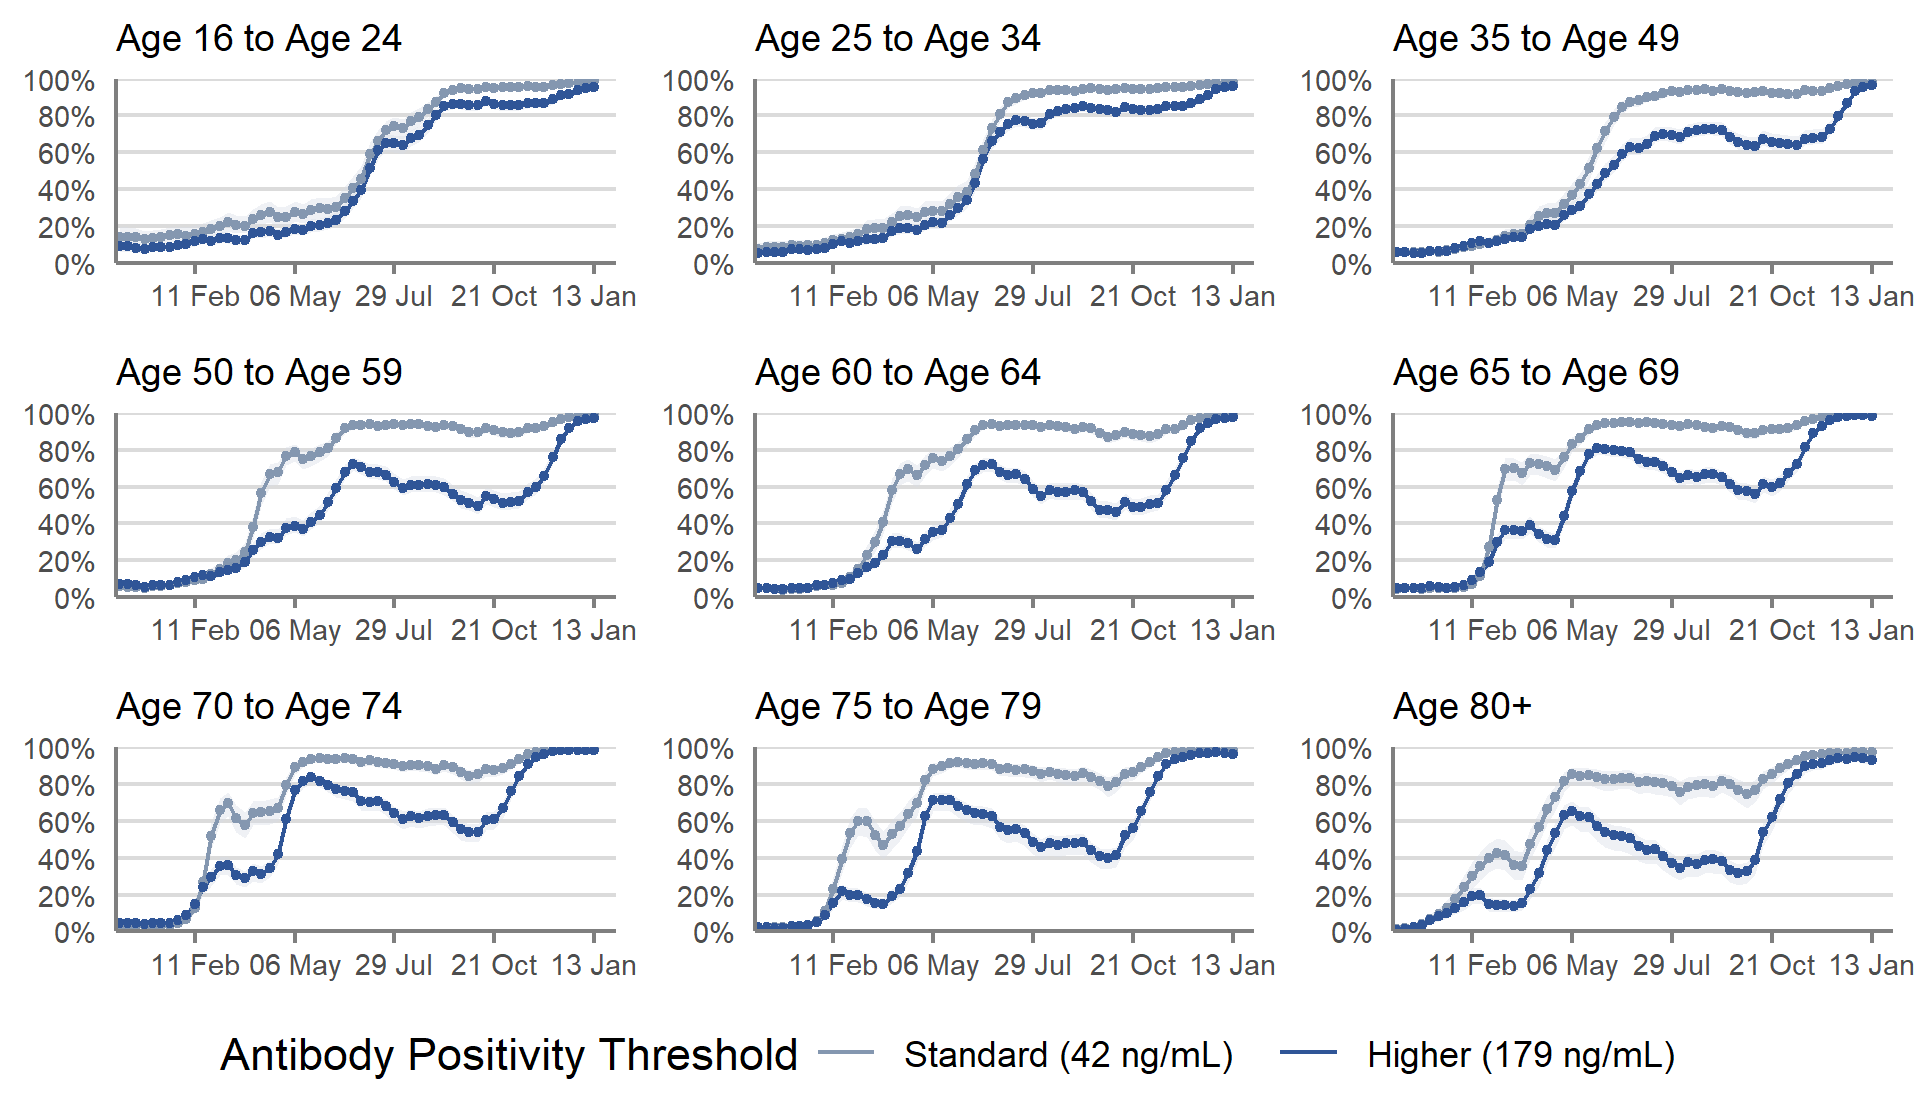 Figure 3: Modelled weekly percentage of people in the adult (16+) population living in private residential households testing positive for antibodies to SARS-CoV-2 from a blood sample, by age group, from 7 December 2020 to the week beginning 10 January 2022, including 95% credible intervals